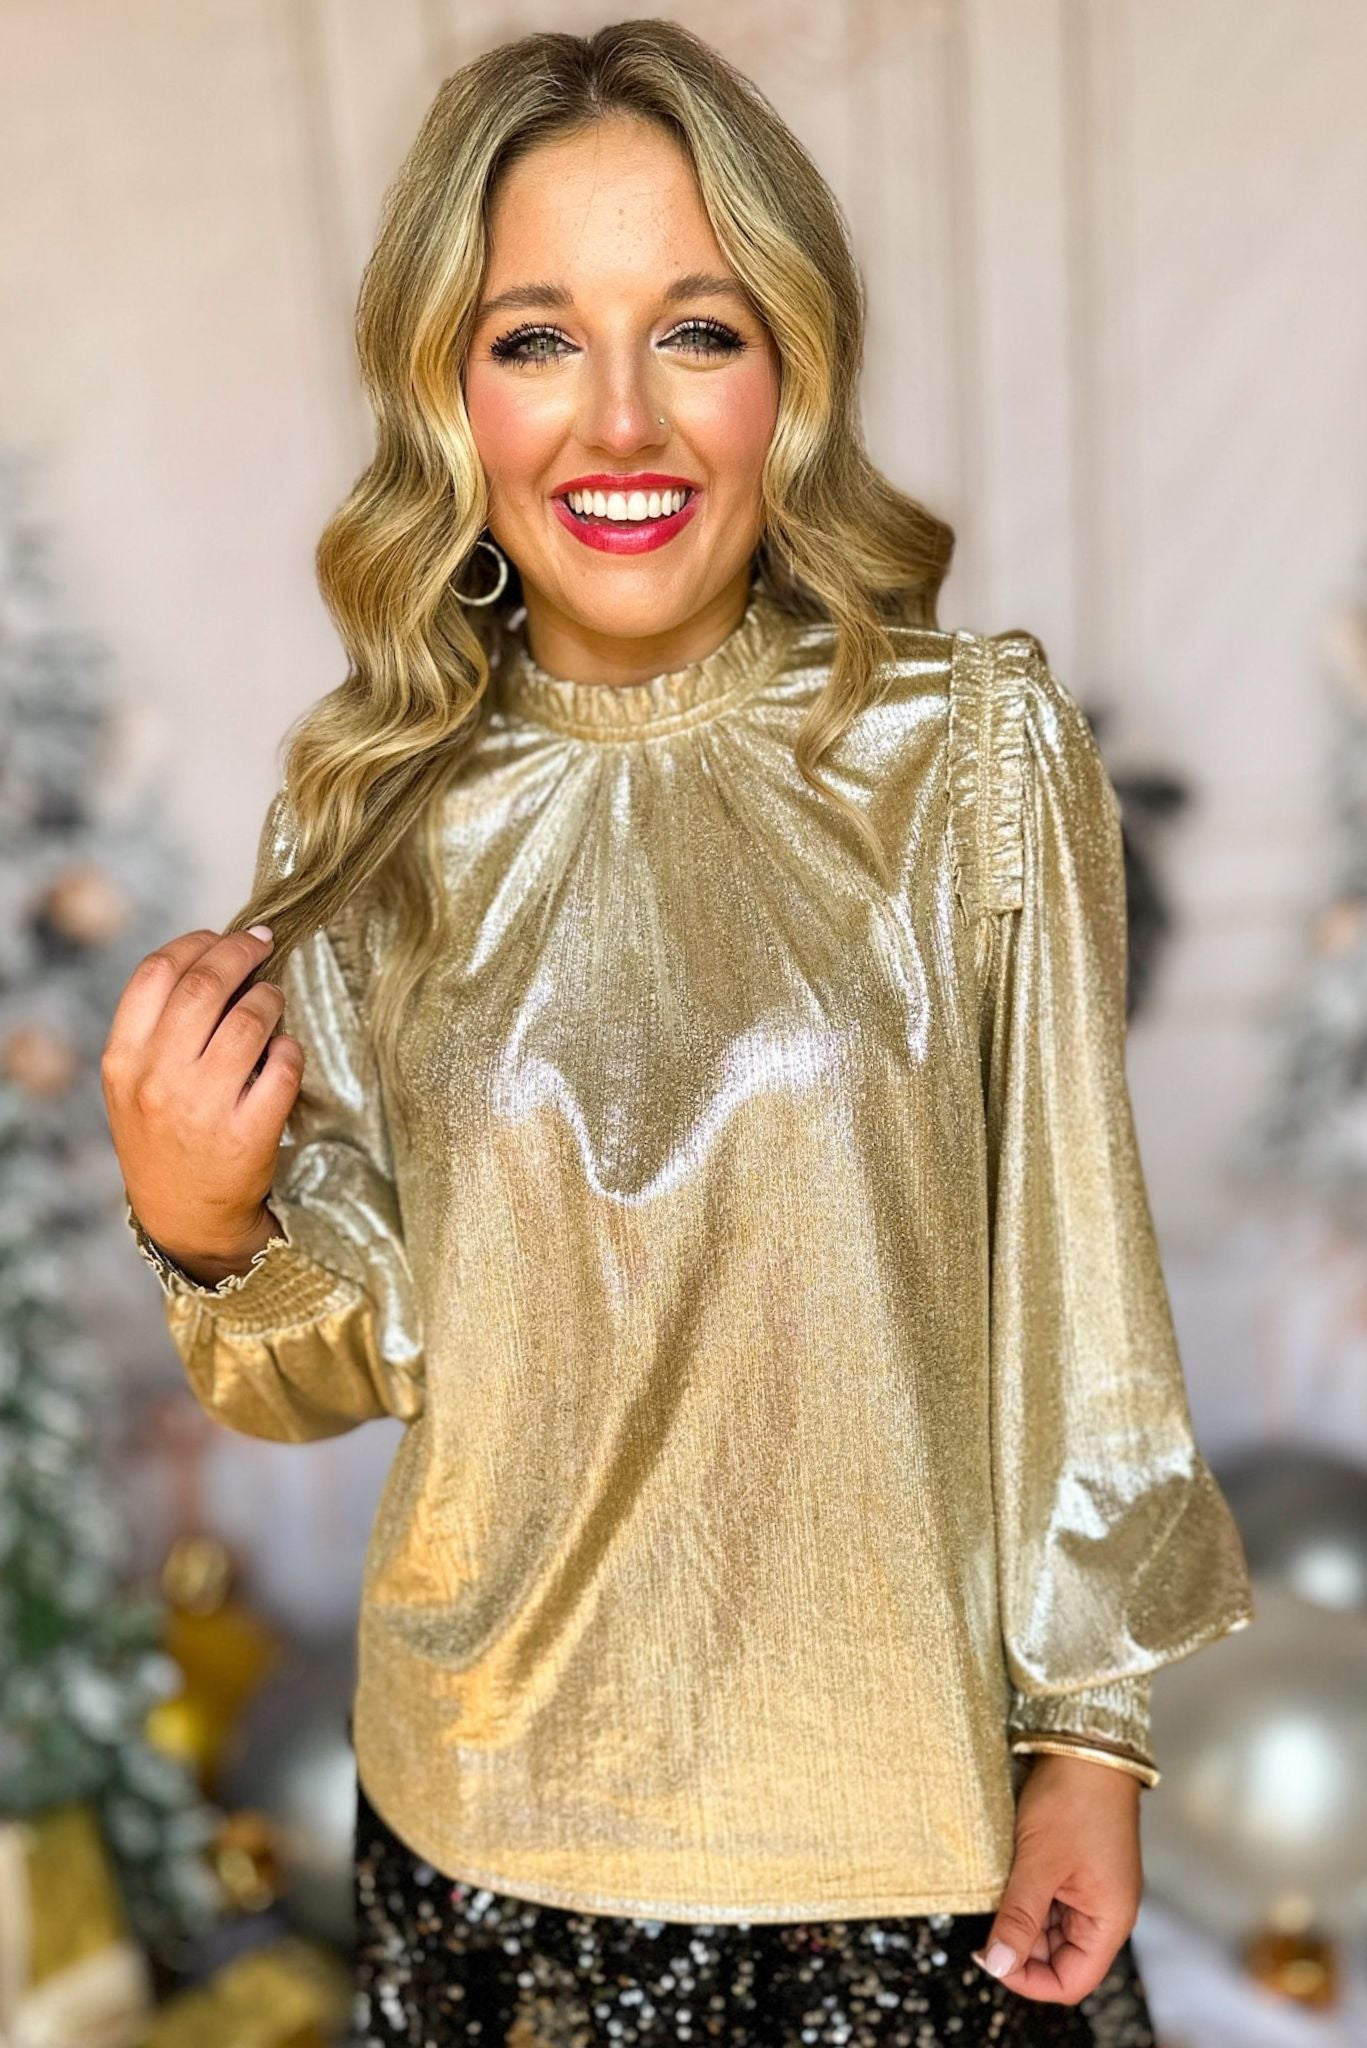 SSYS The Noelle Top In Champagne, must have top, must have style, must have holiday, holiday collection, holiday fashion, elevated style, elevated top, mom style, holiday style, shop style your senses by mallory fitzsimmons